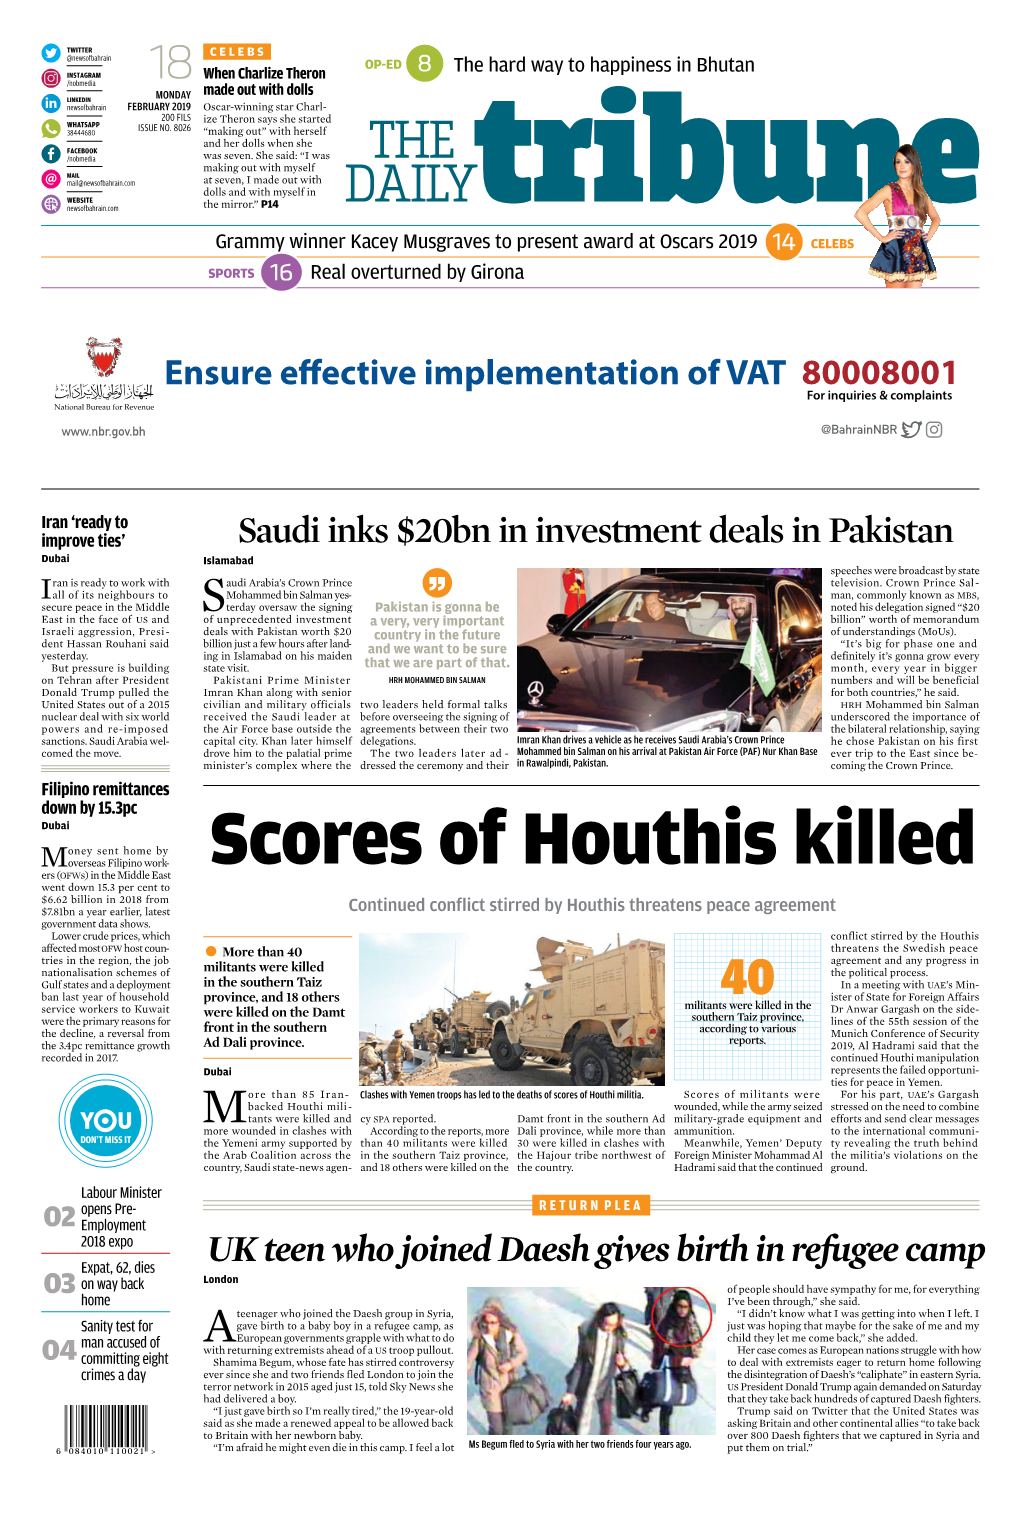 Scores of Houthis Killed